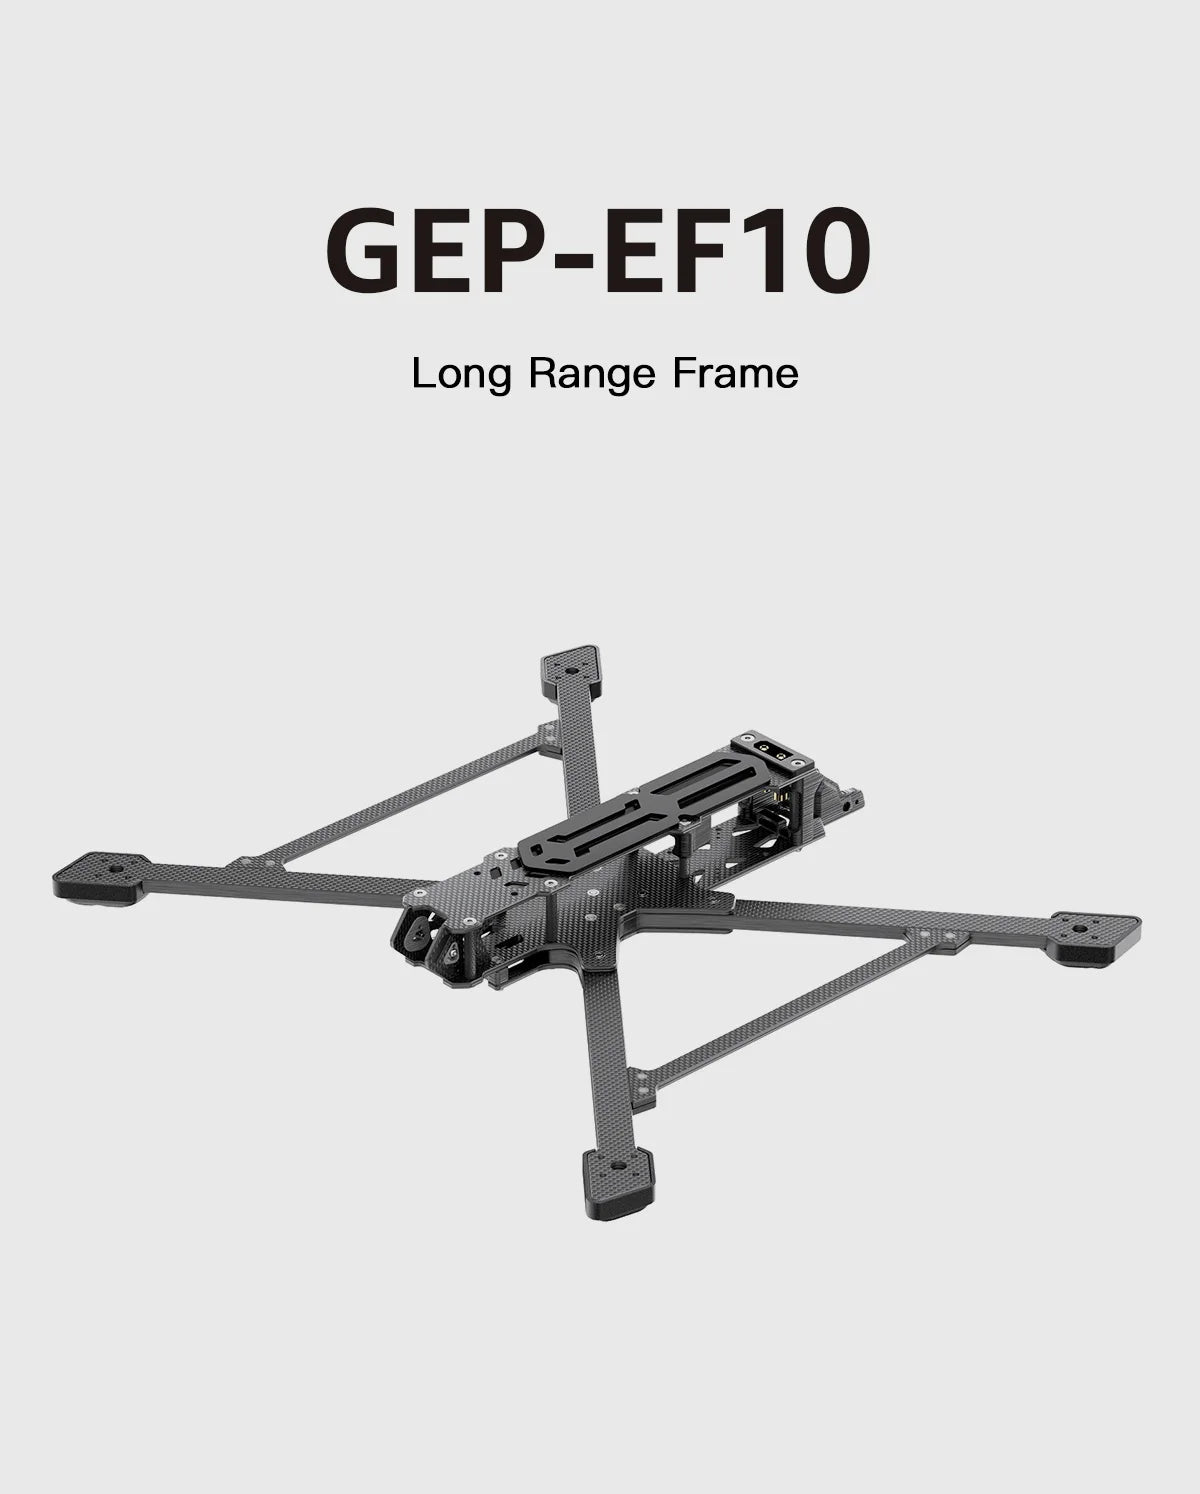 GEPRC GEP-EF10 Frame Parts, high-strength 7mm drone arm and 3.5mm stiffener bar enhance